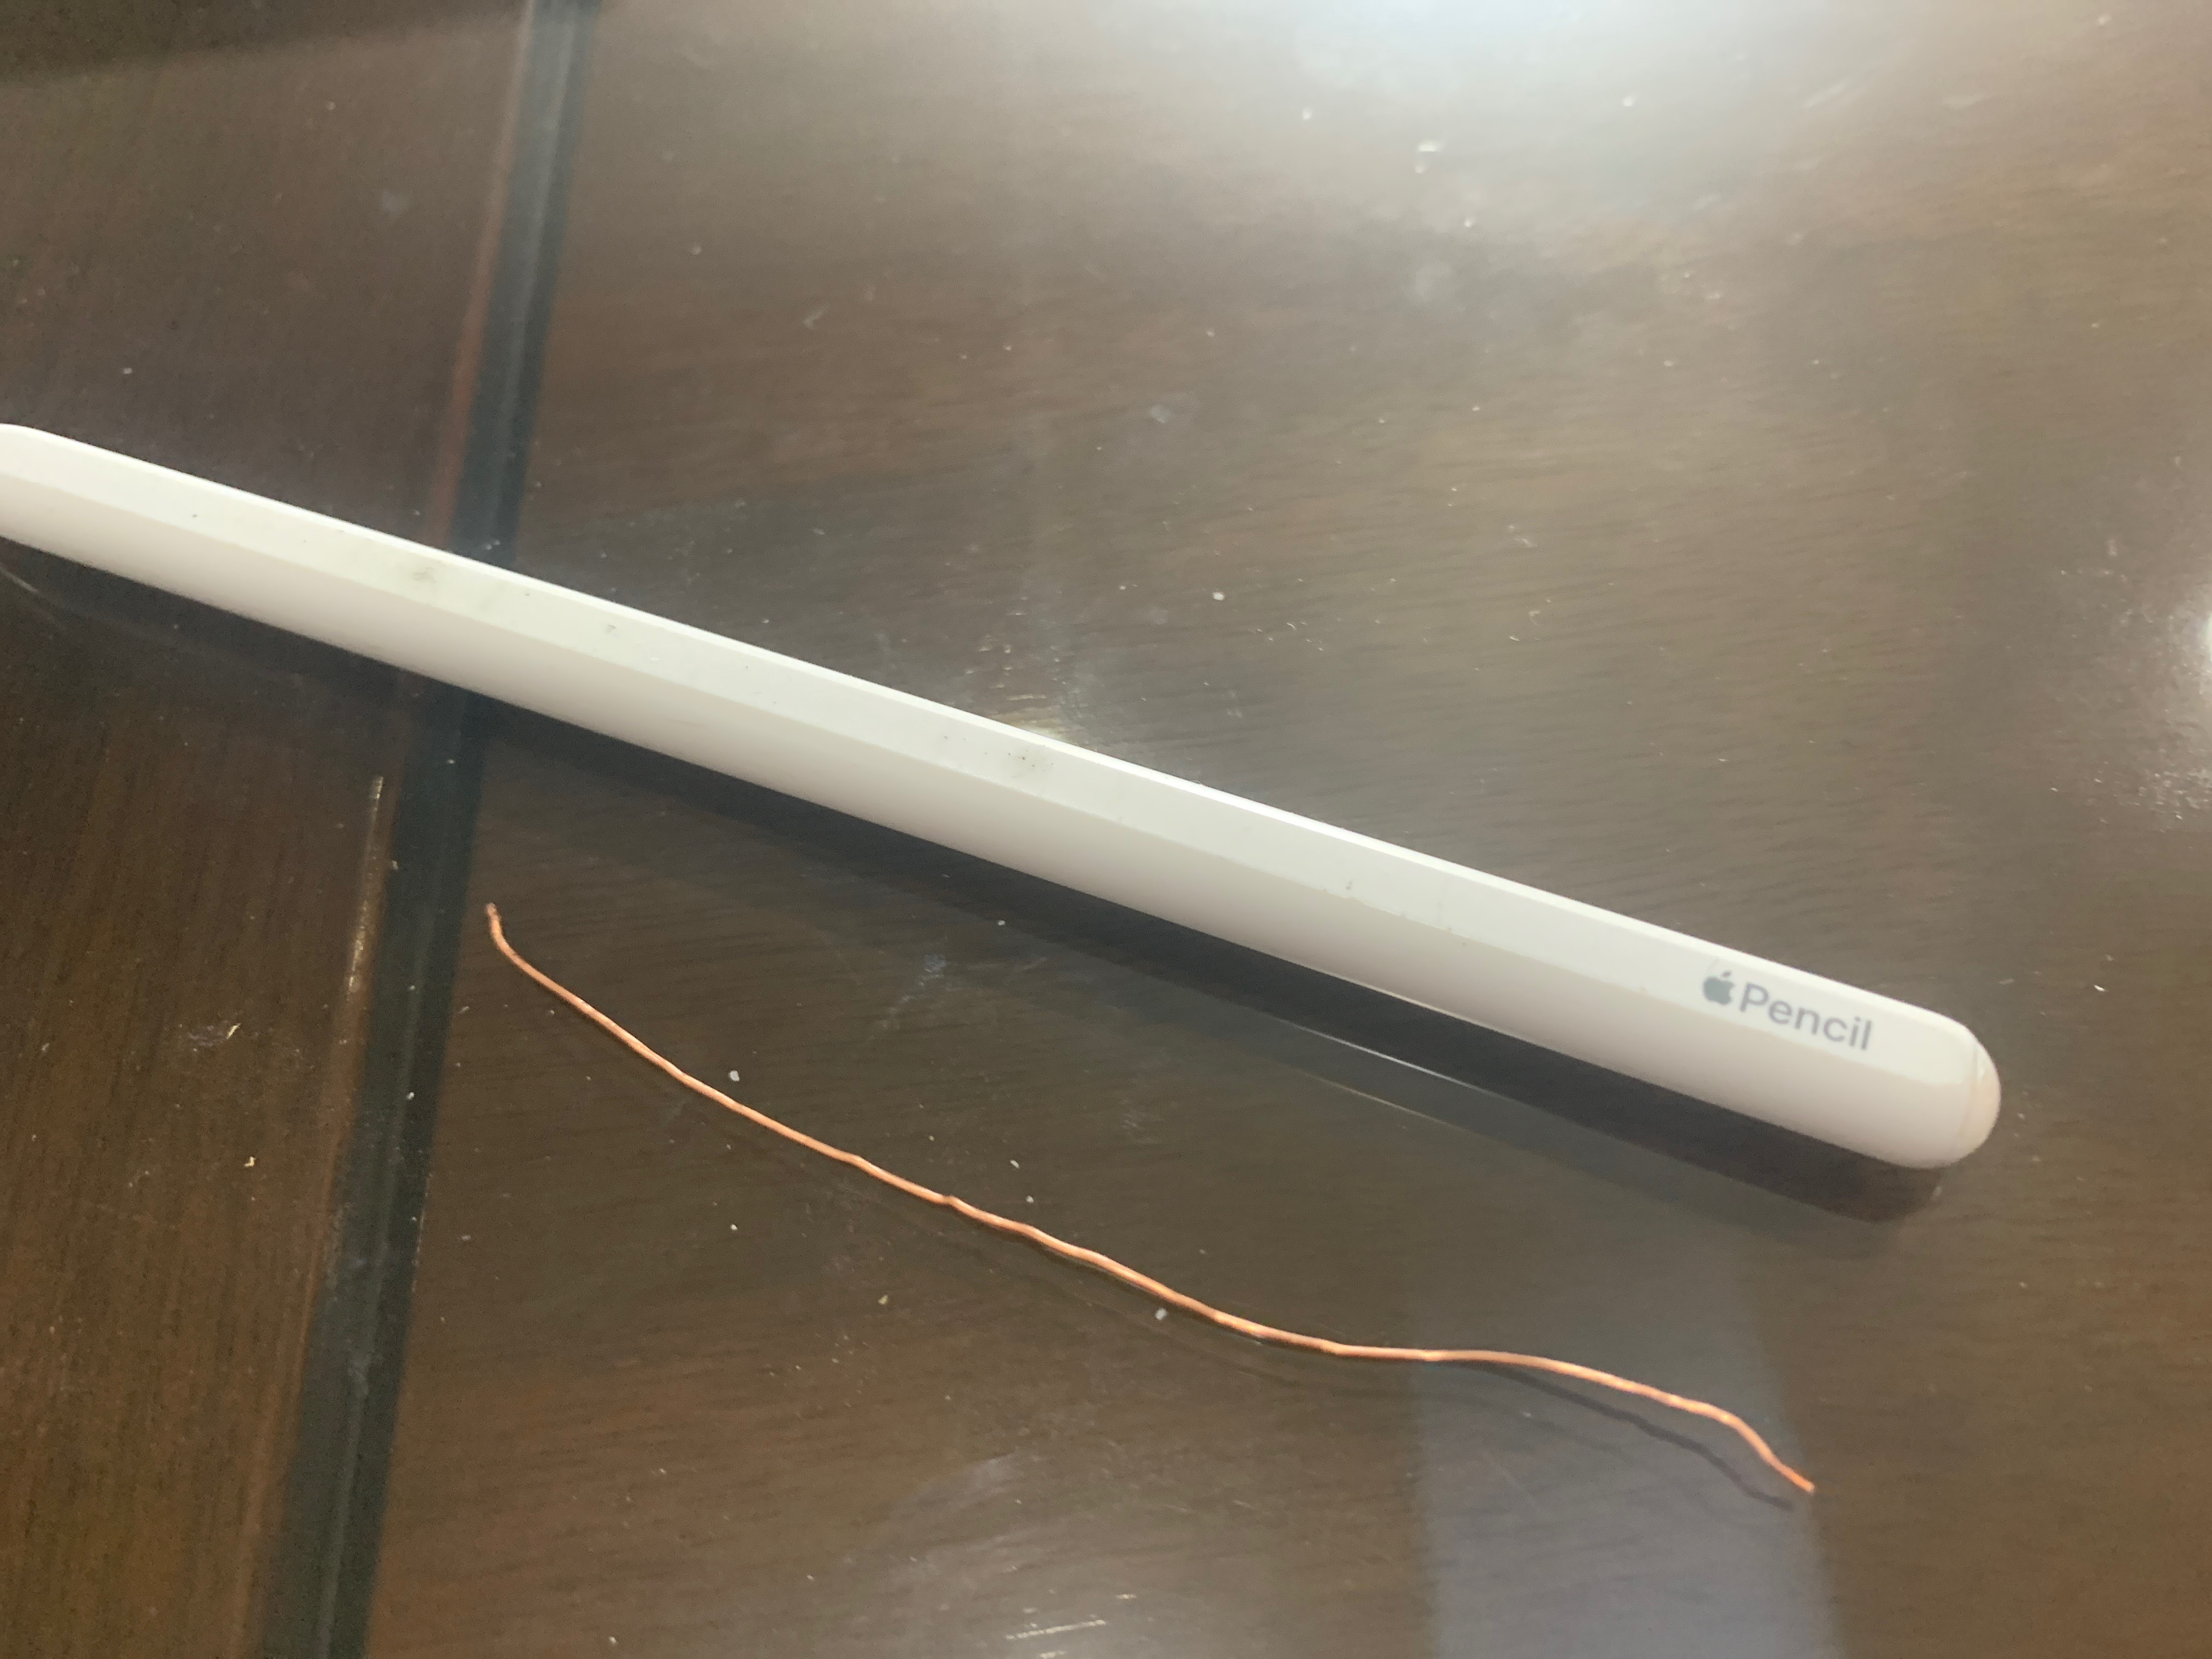 How long does it take to charge a dead Apple Pencil 2?